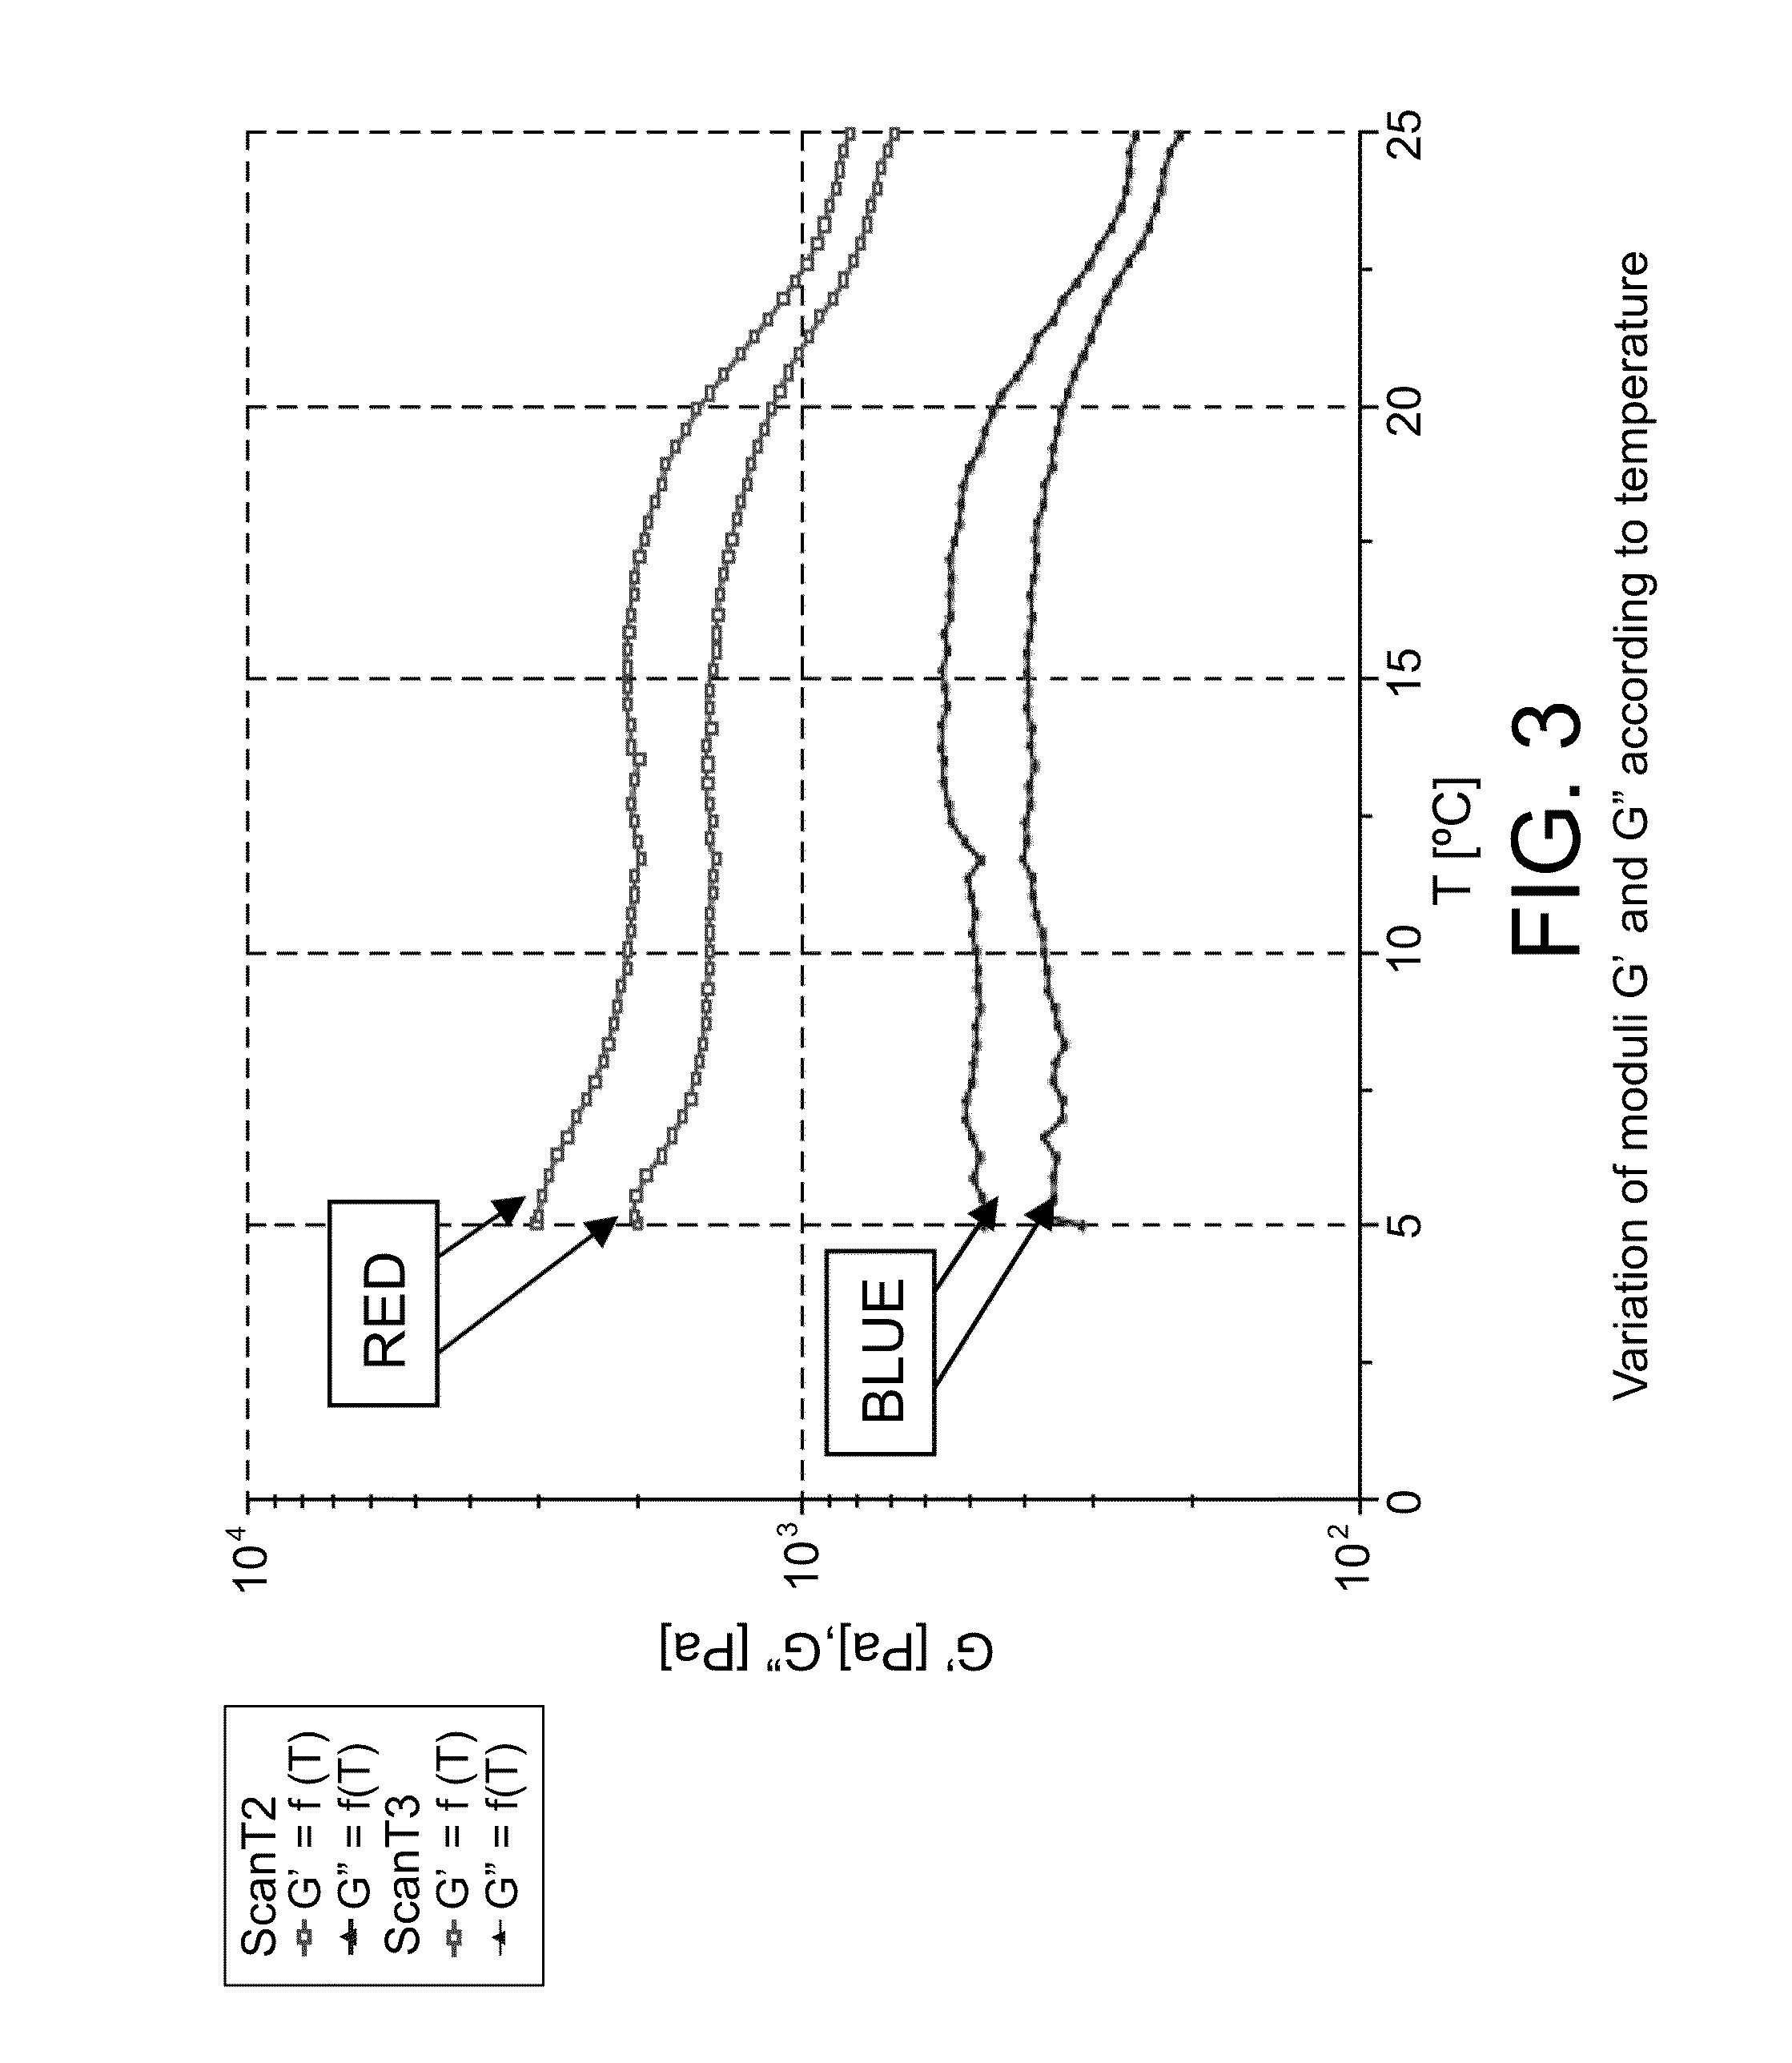 Butter and process for obtaining same